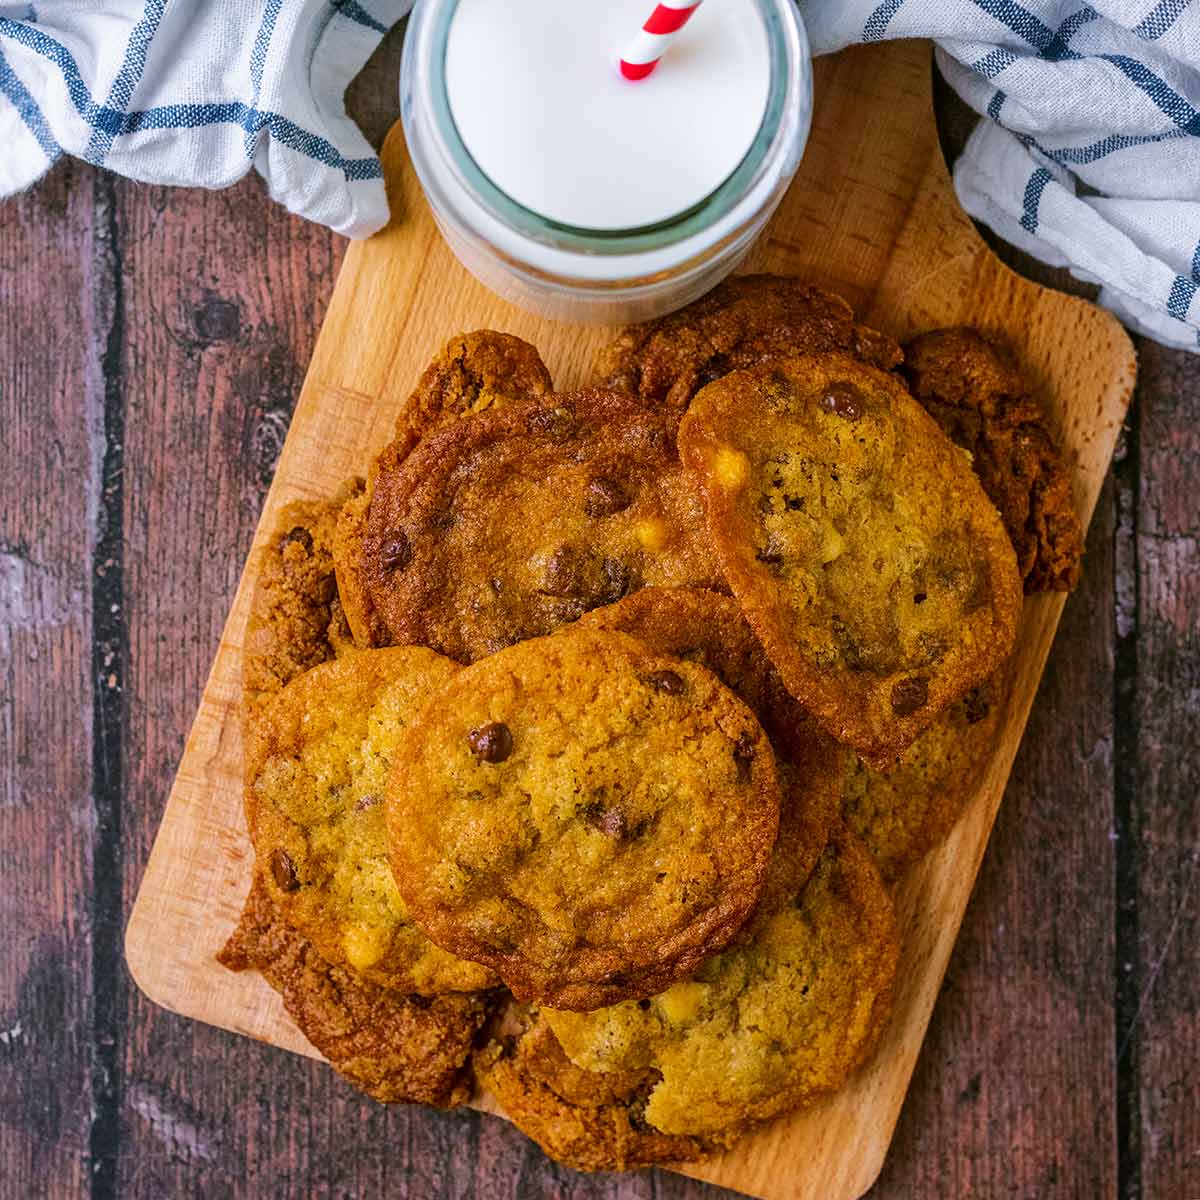 https://hungryhealthyhappy.com/wp-content/uploads/2022/12/air-fryer-cookies-featured.jpg